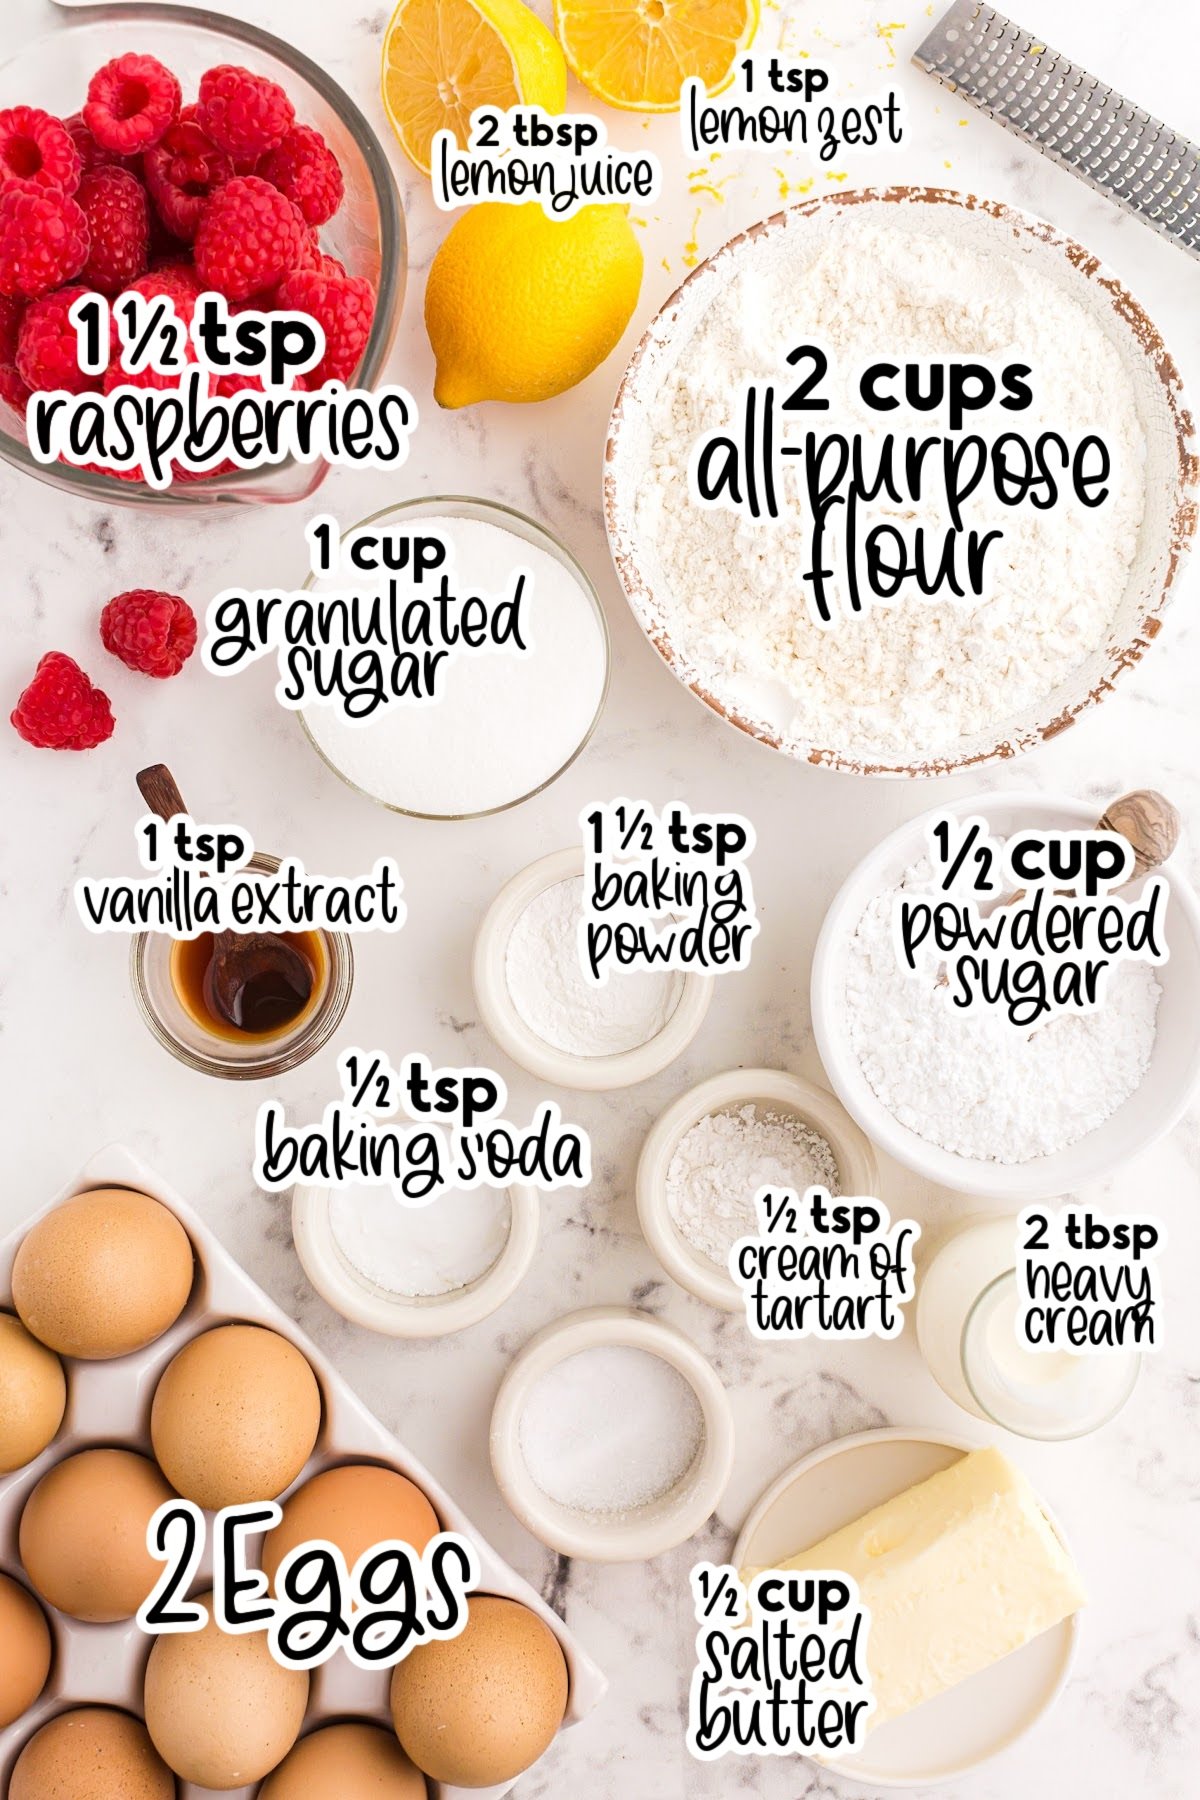 All ingredients layed out on the counter to make these cookies, with text overlays.